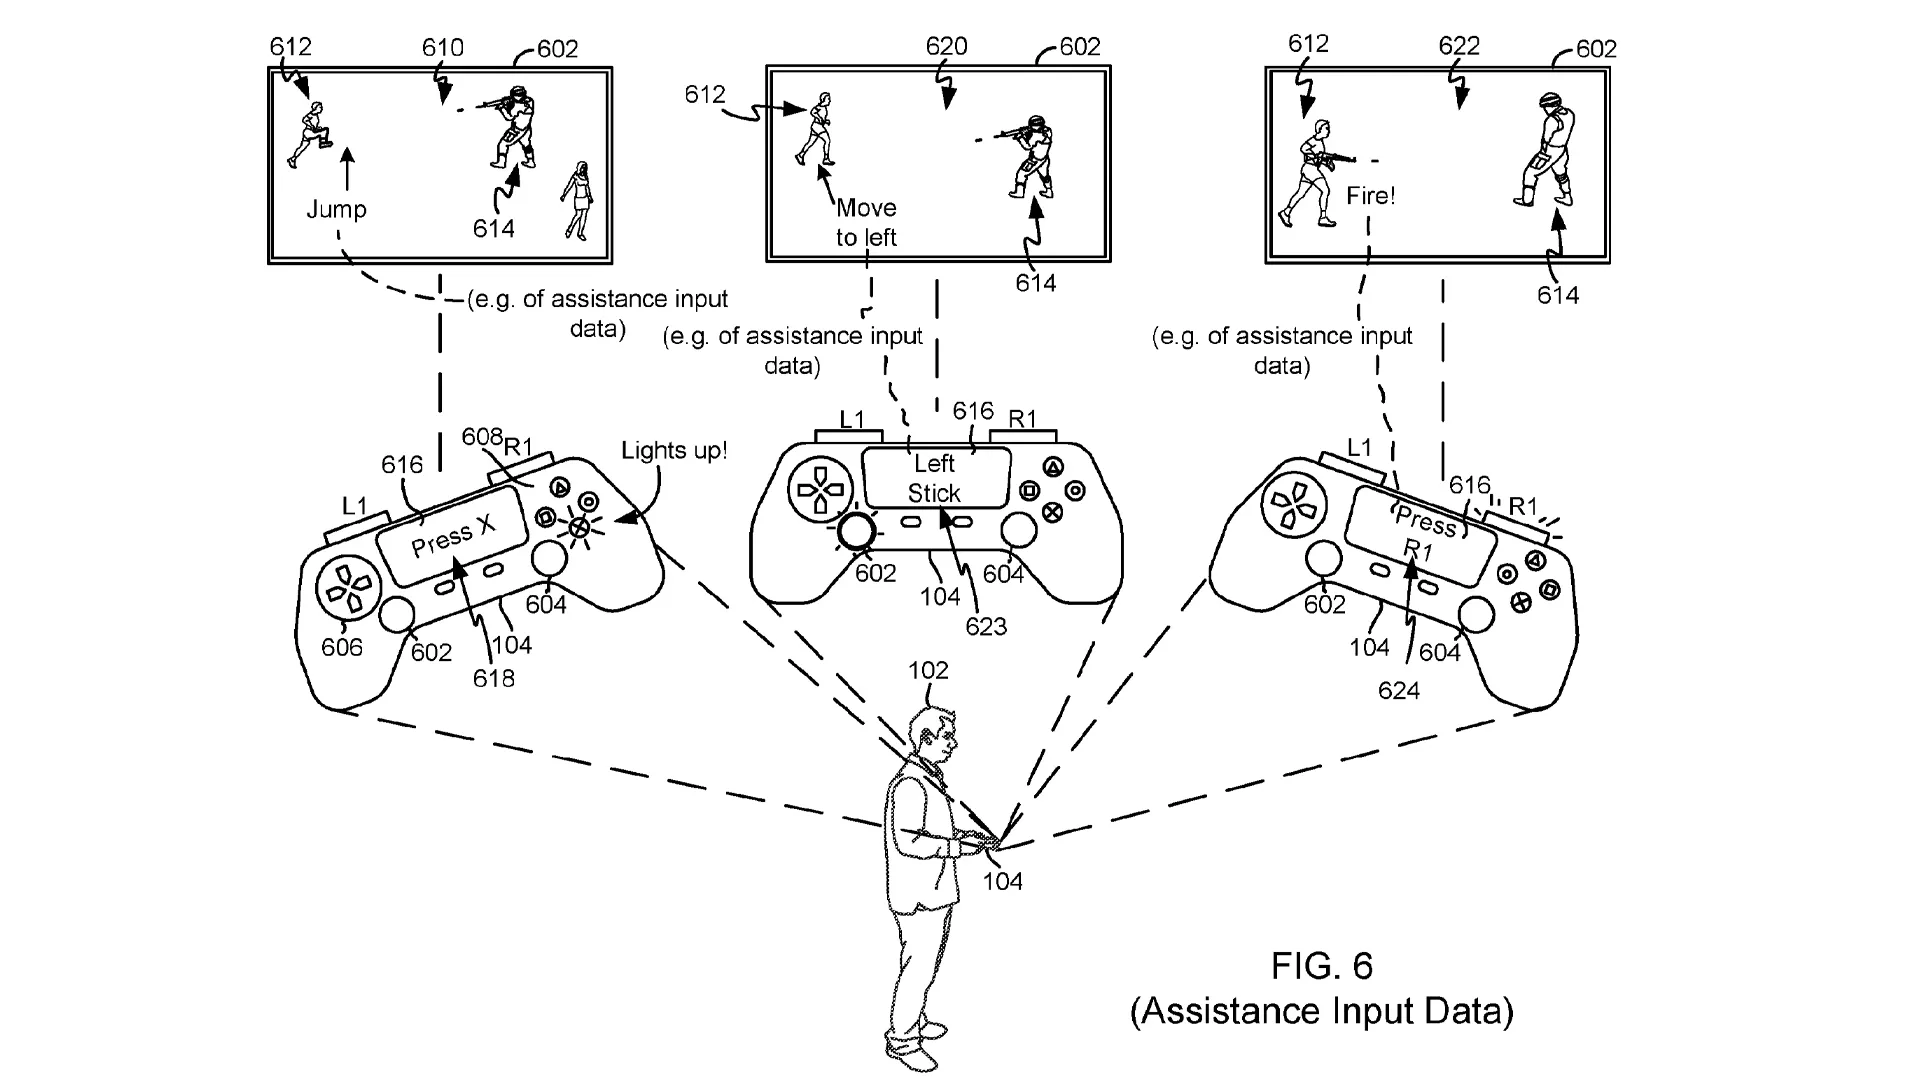 Sony Patents New PS5 DualSense Controller